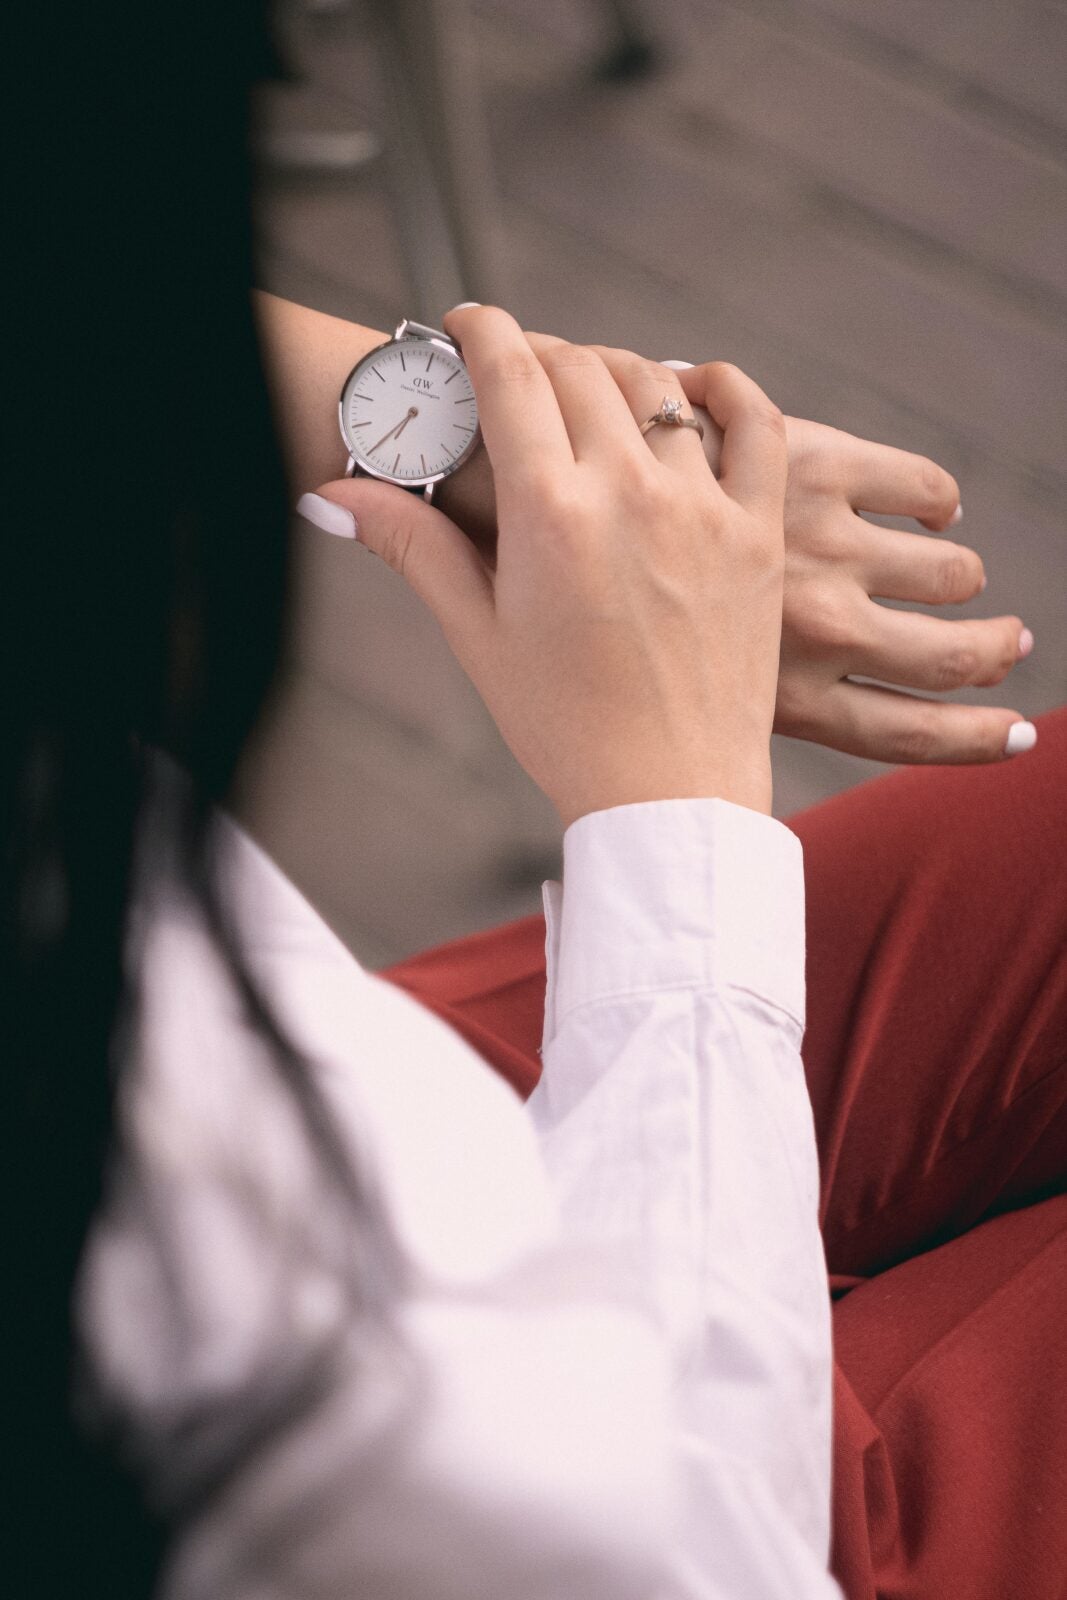 A woman with painted white nails looks at the watch on her hand.